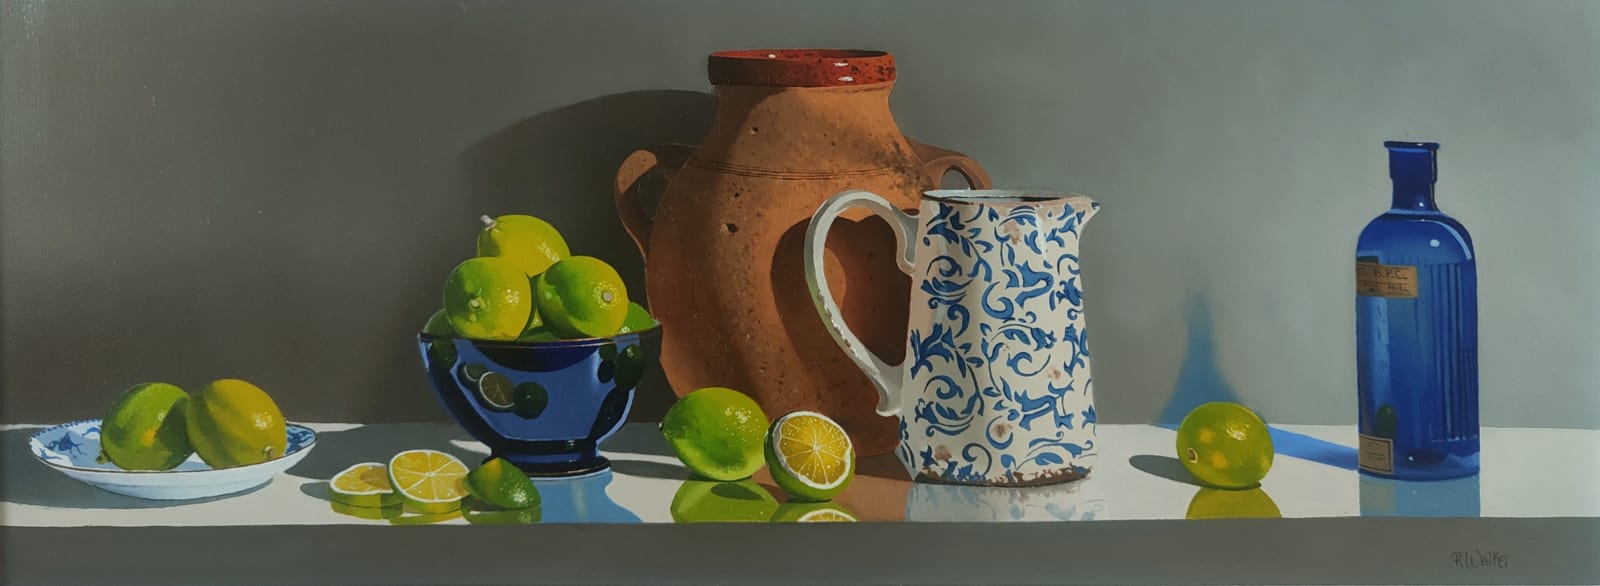 Rob Walker, OLd Pot with patterned jug and limes